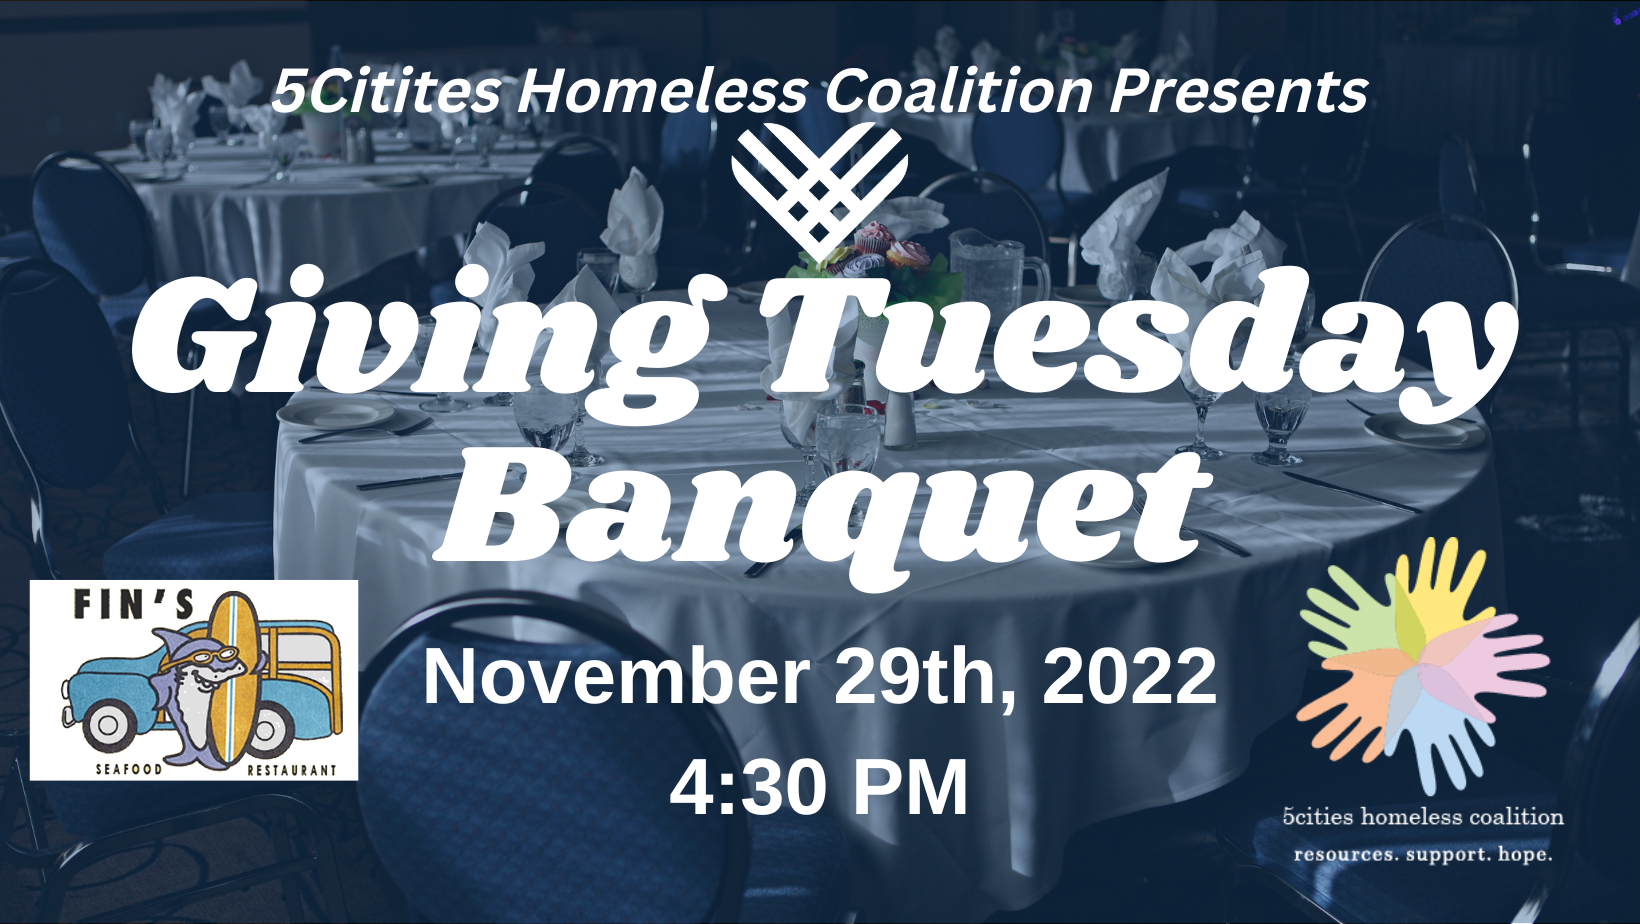 Giving Tuesday Banquet 2022